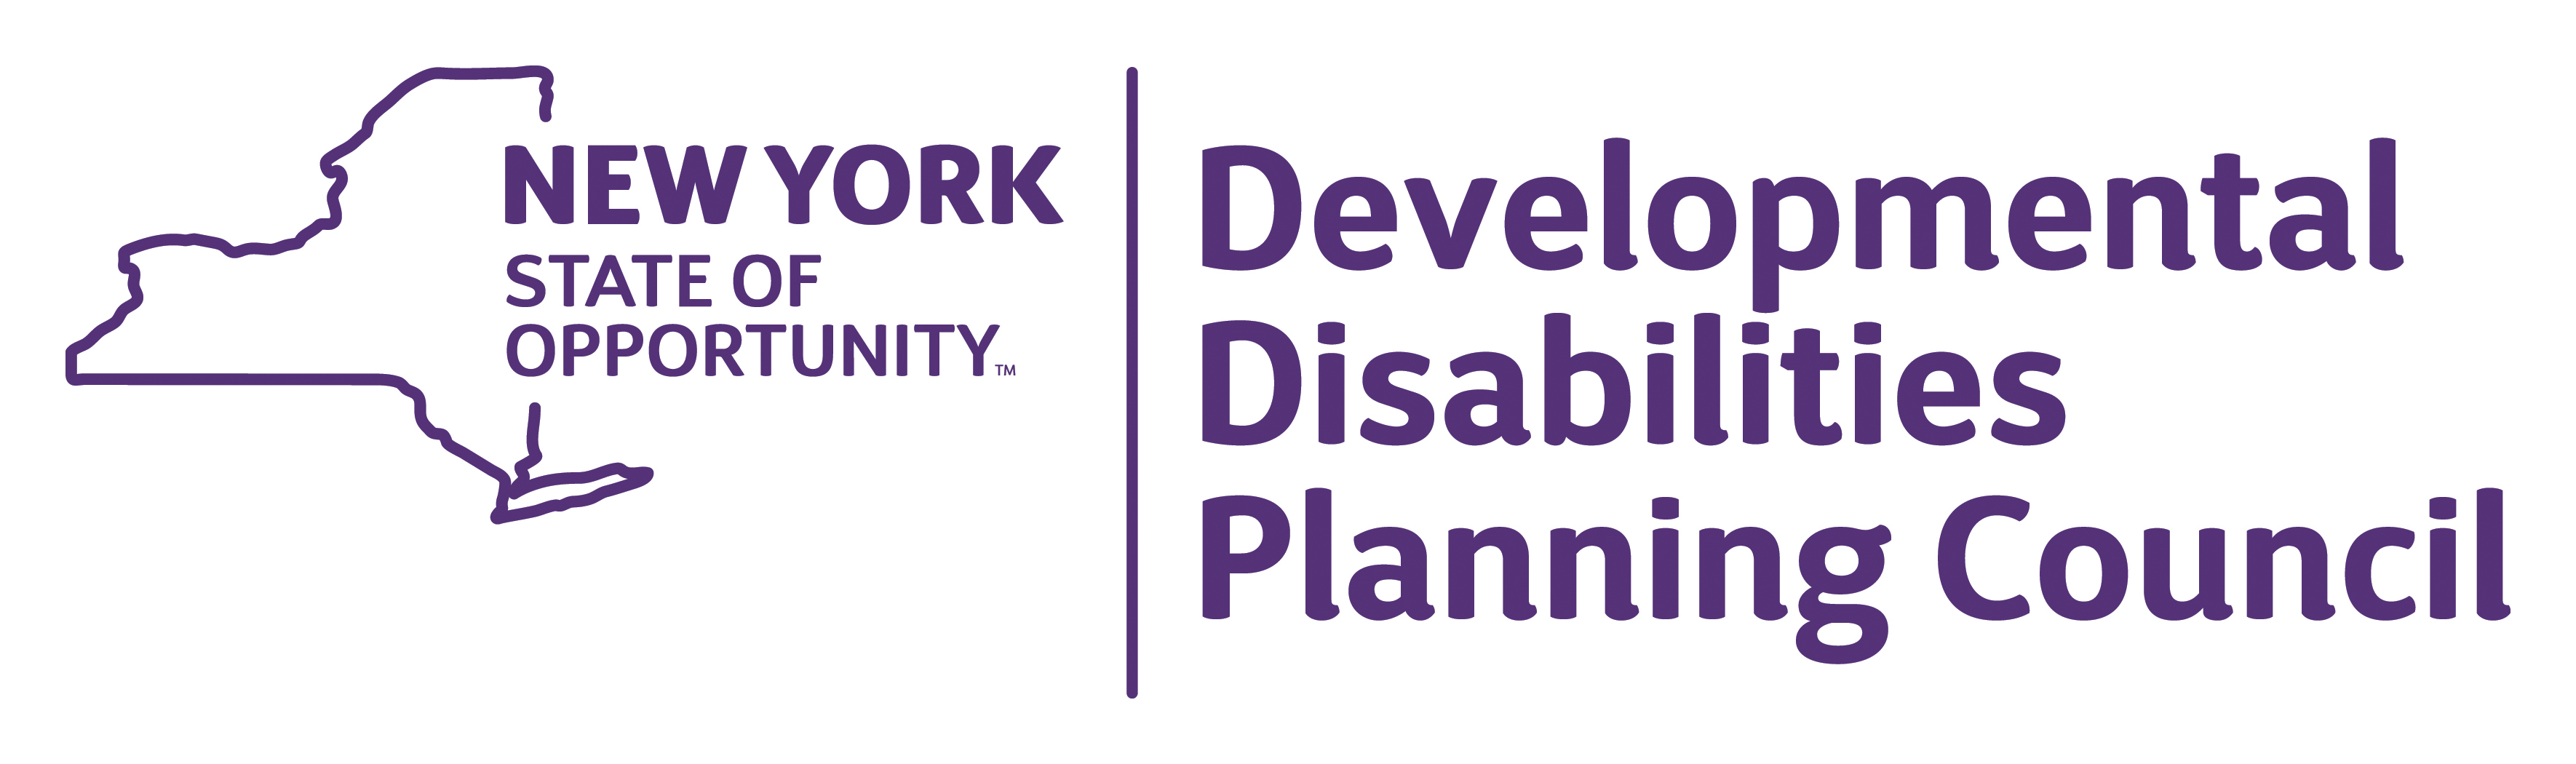 New York State of Opportunity - Developmental Disabilities Planning Council logo